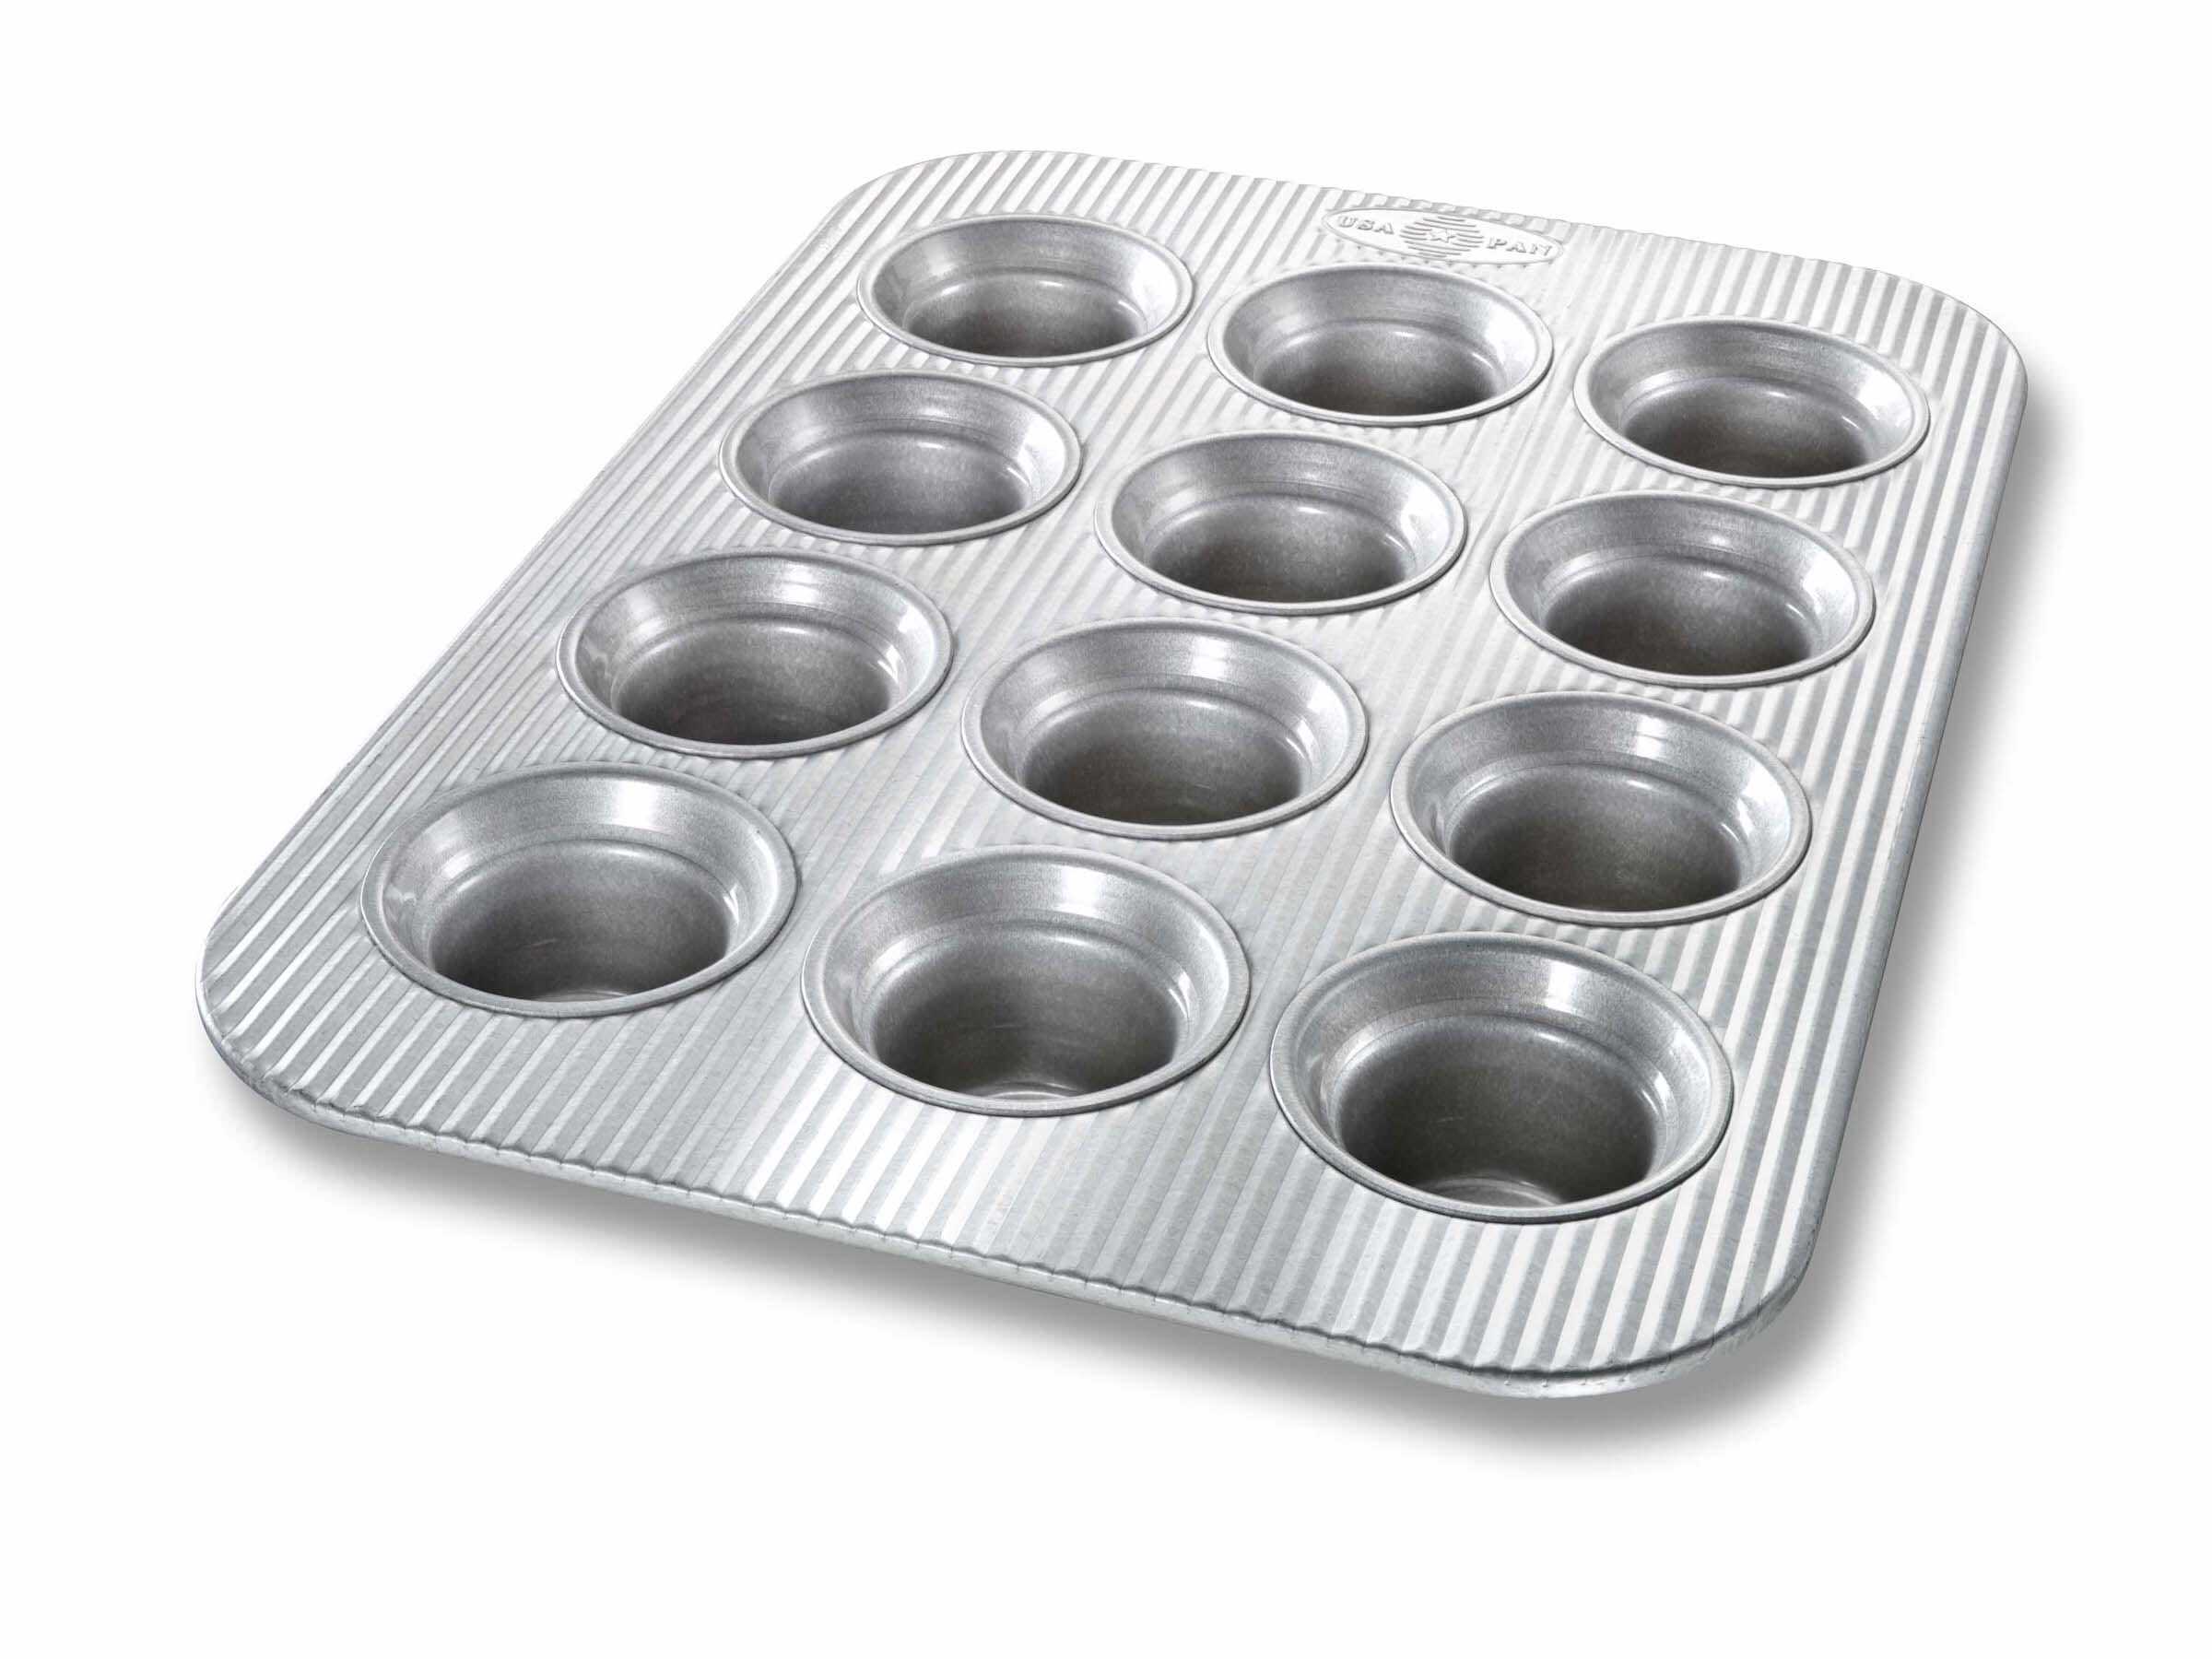 Standard Muffin Pan, 24 Forms